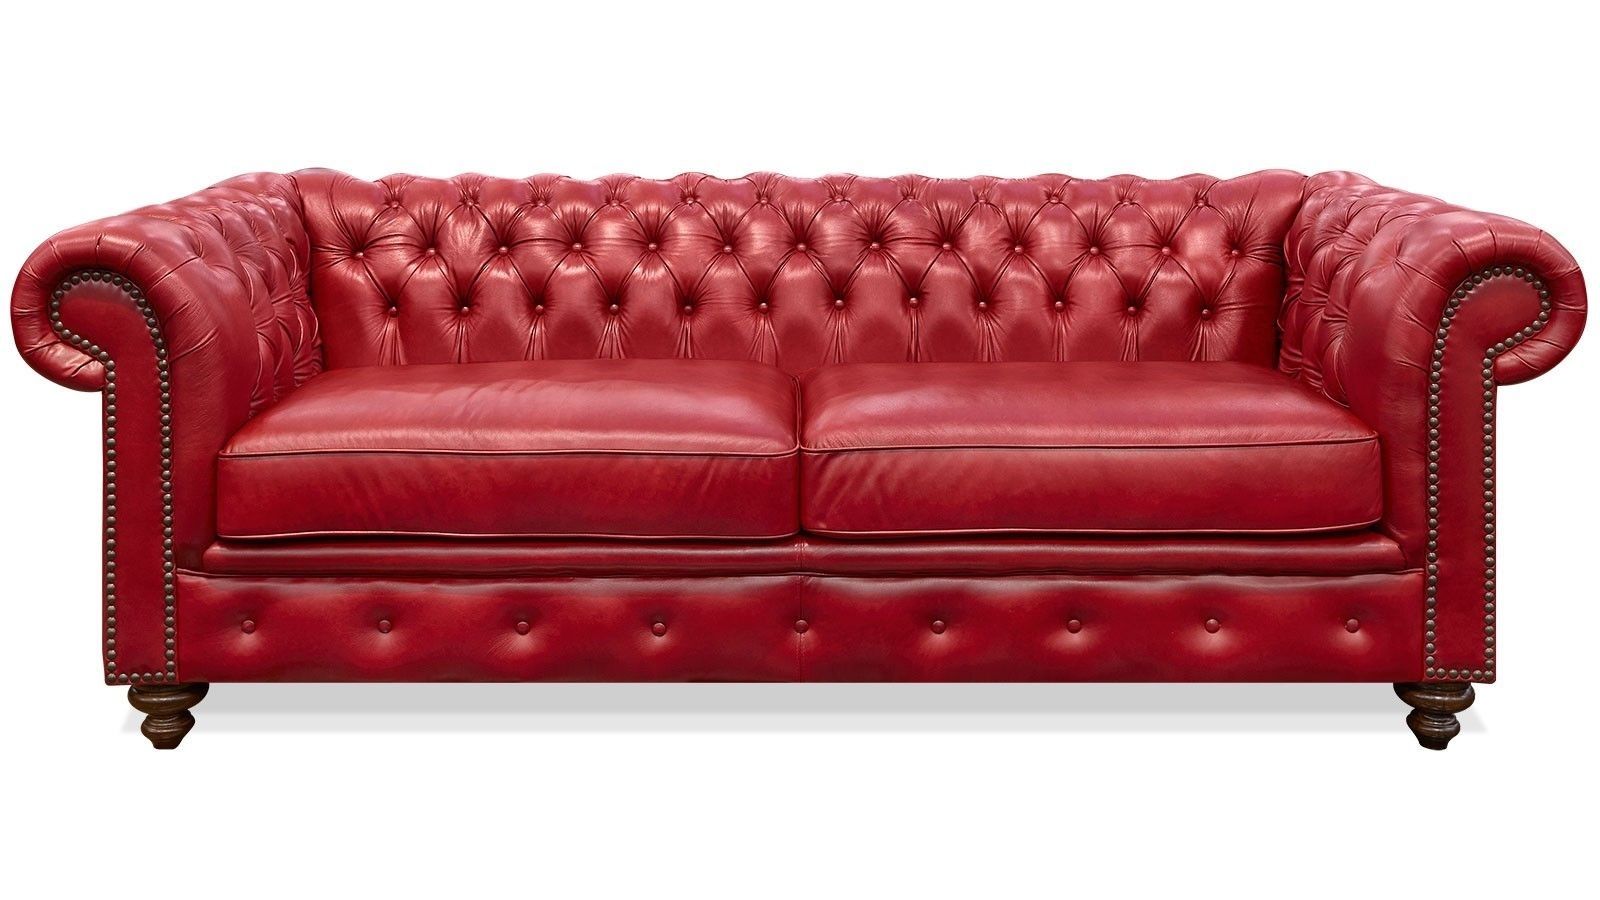 Unbelievable Red Leather Sofa With Jinanhongyu Picture For Trend And With Red Leather Sofas (View 5 of 15)